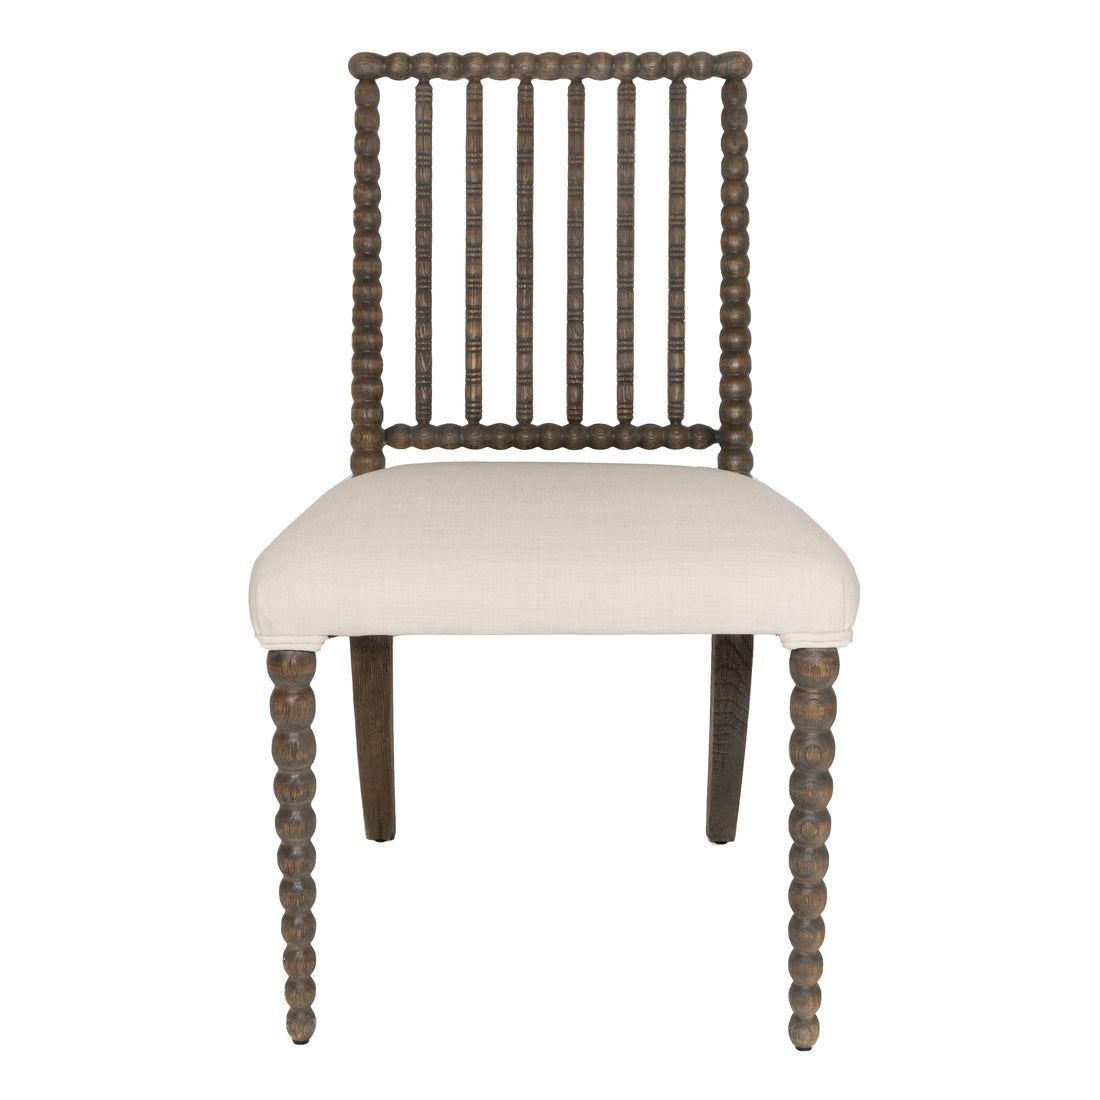 WOODEN DINING CHAIR